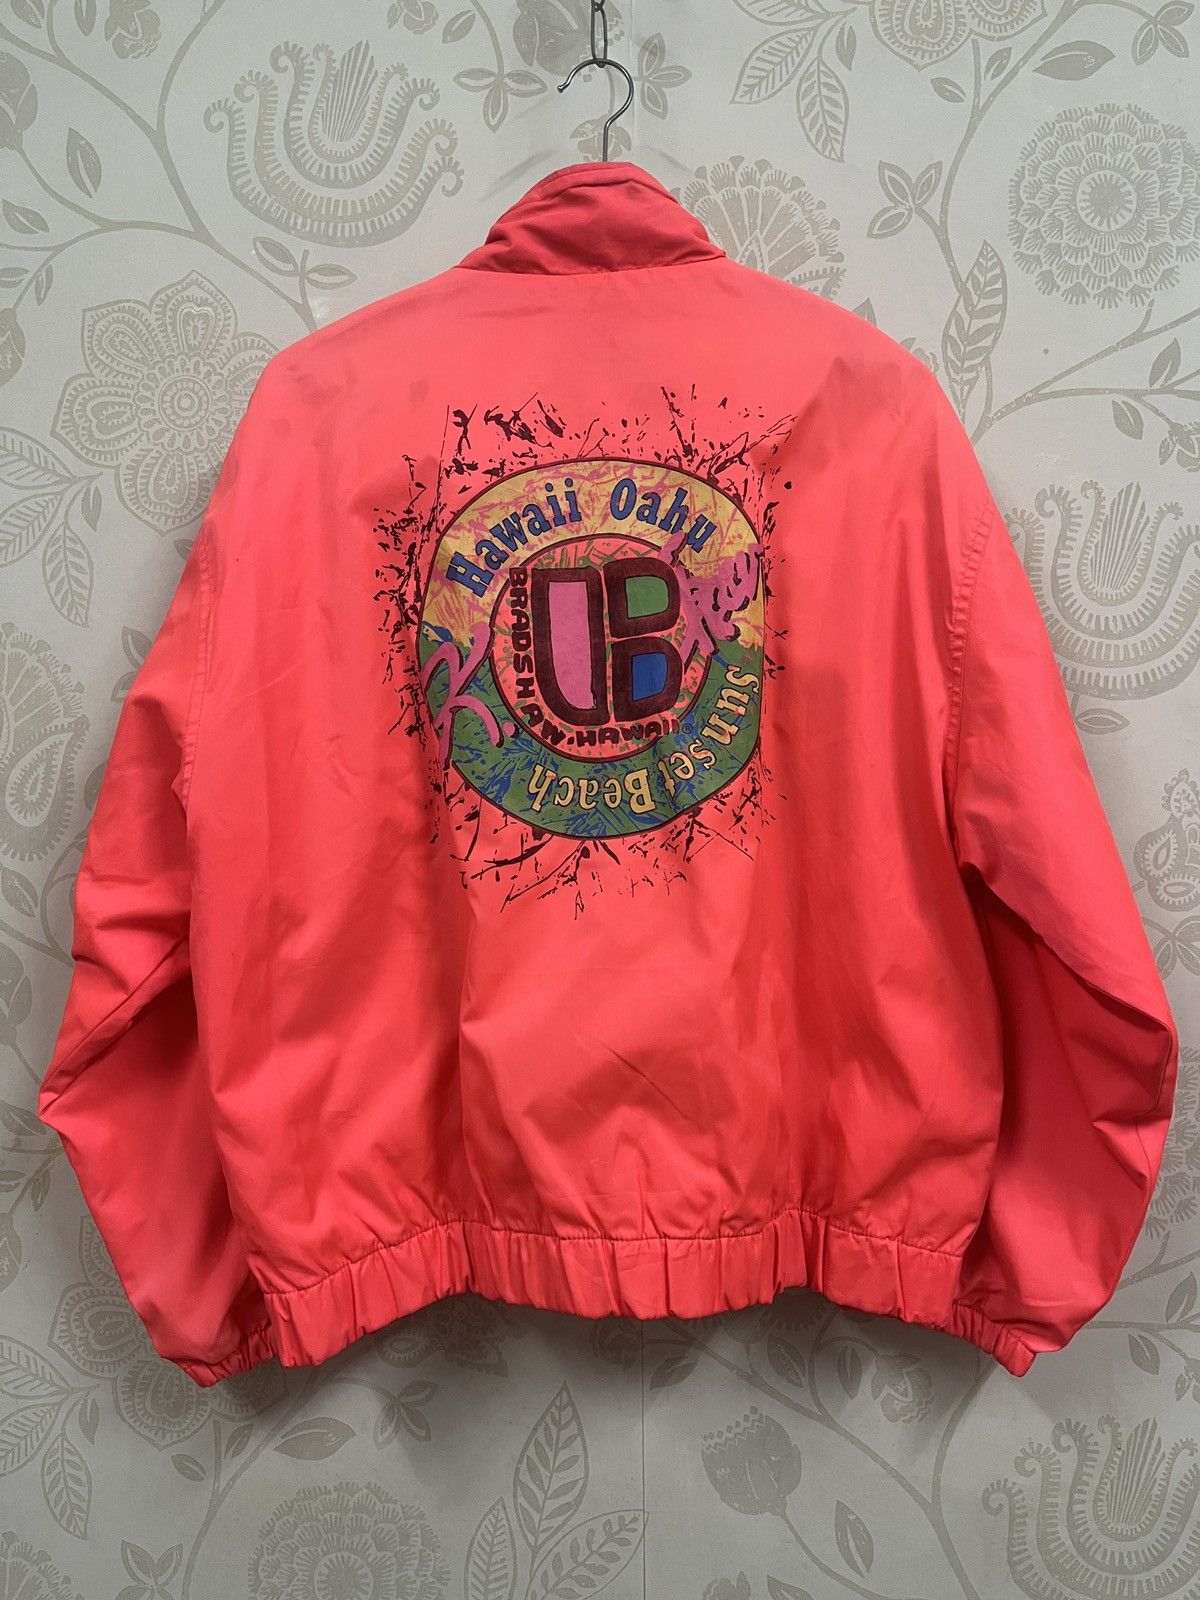 Vintage 80s Surf Style Jacket Fluorescent Red Hawaii USA - 2